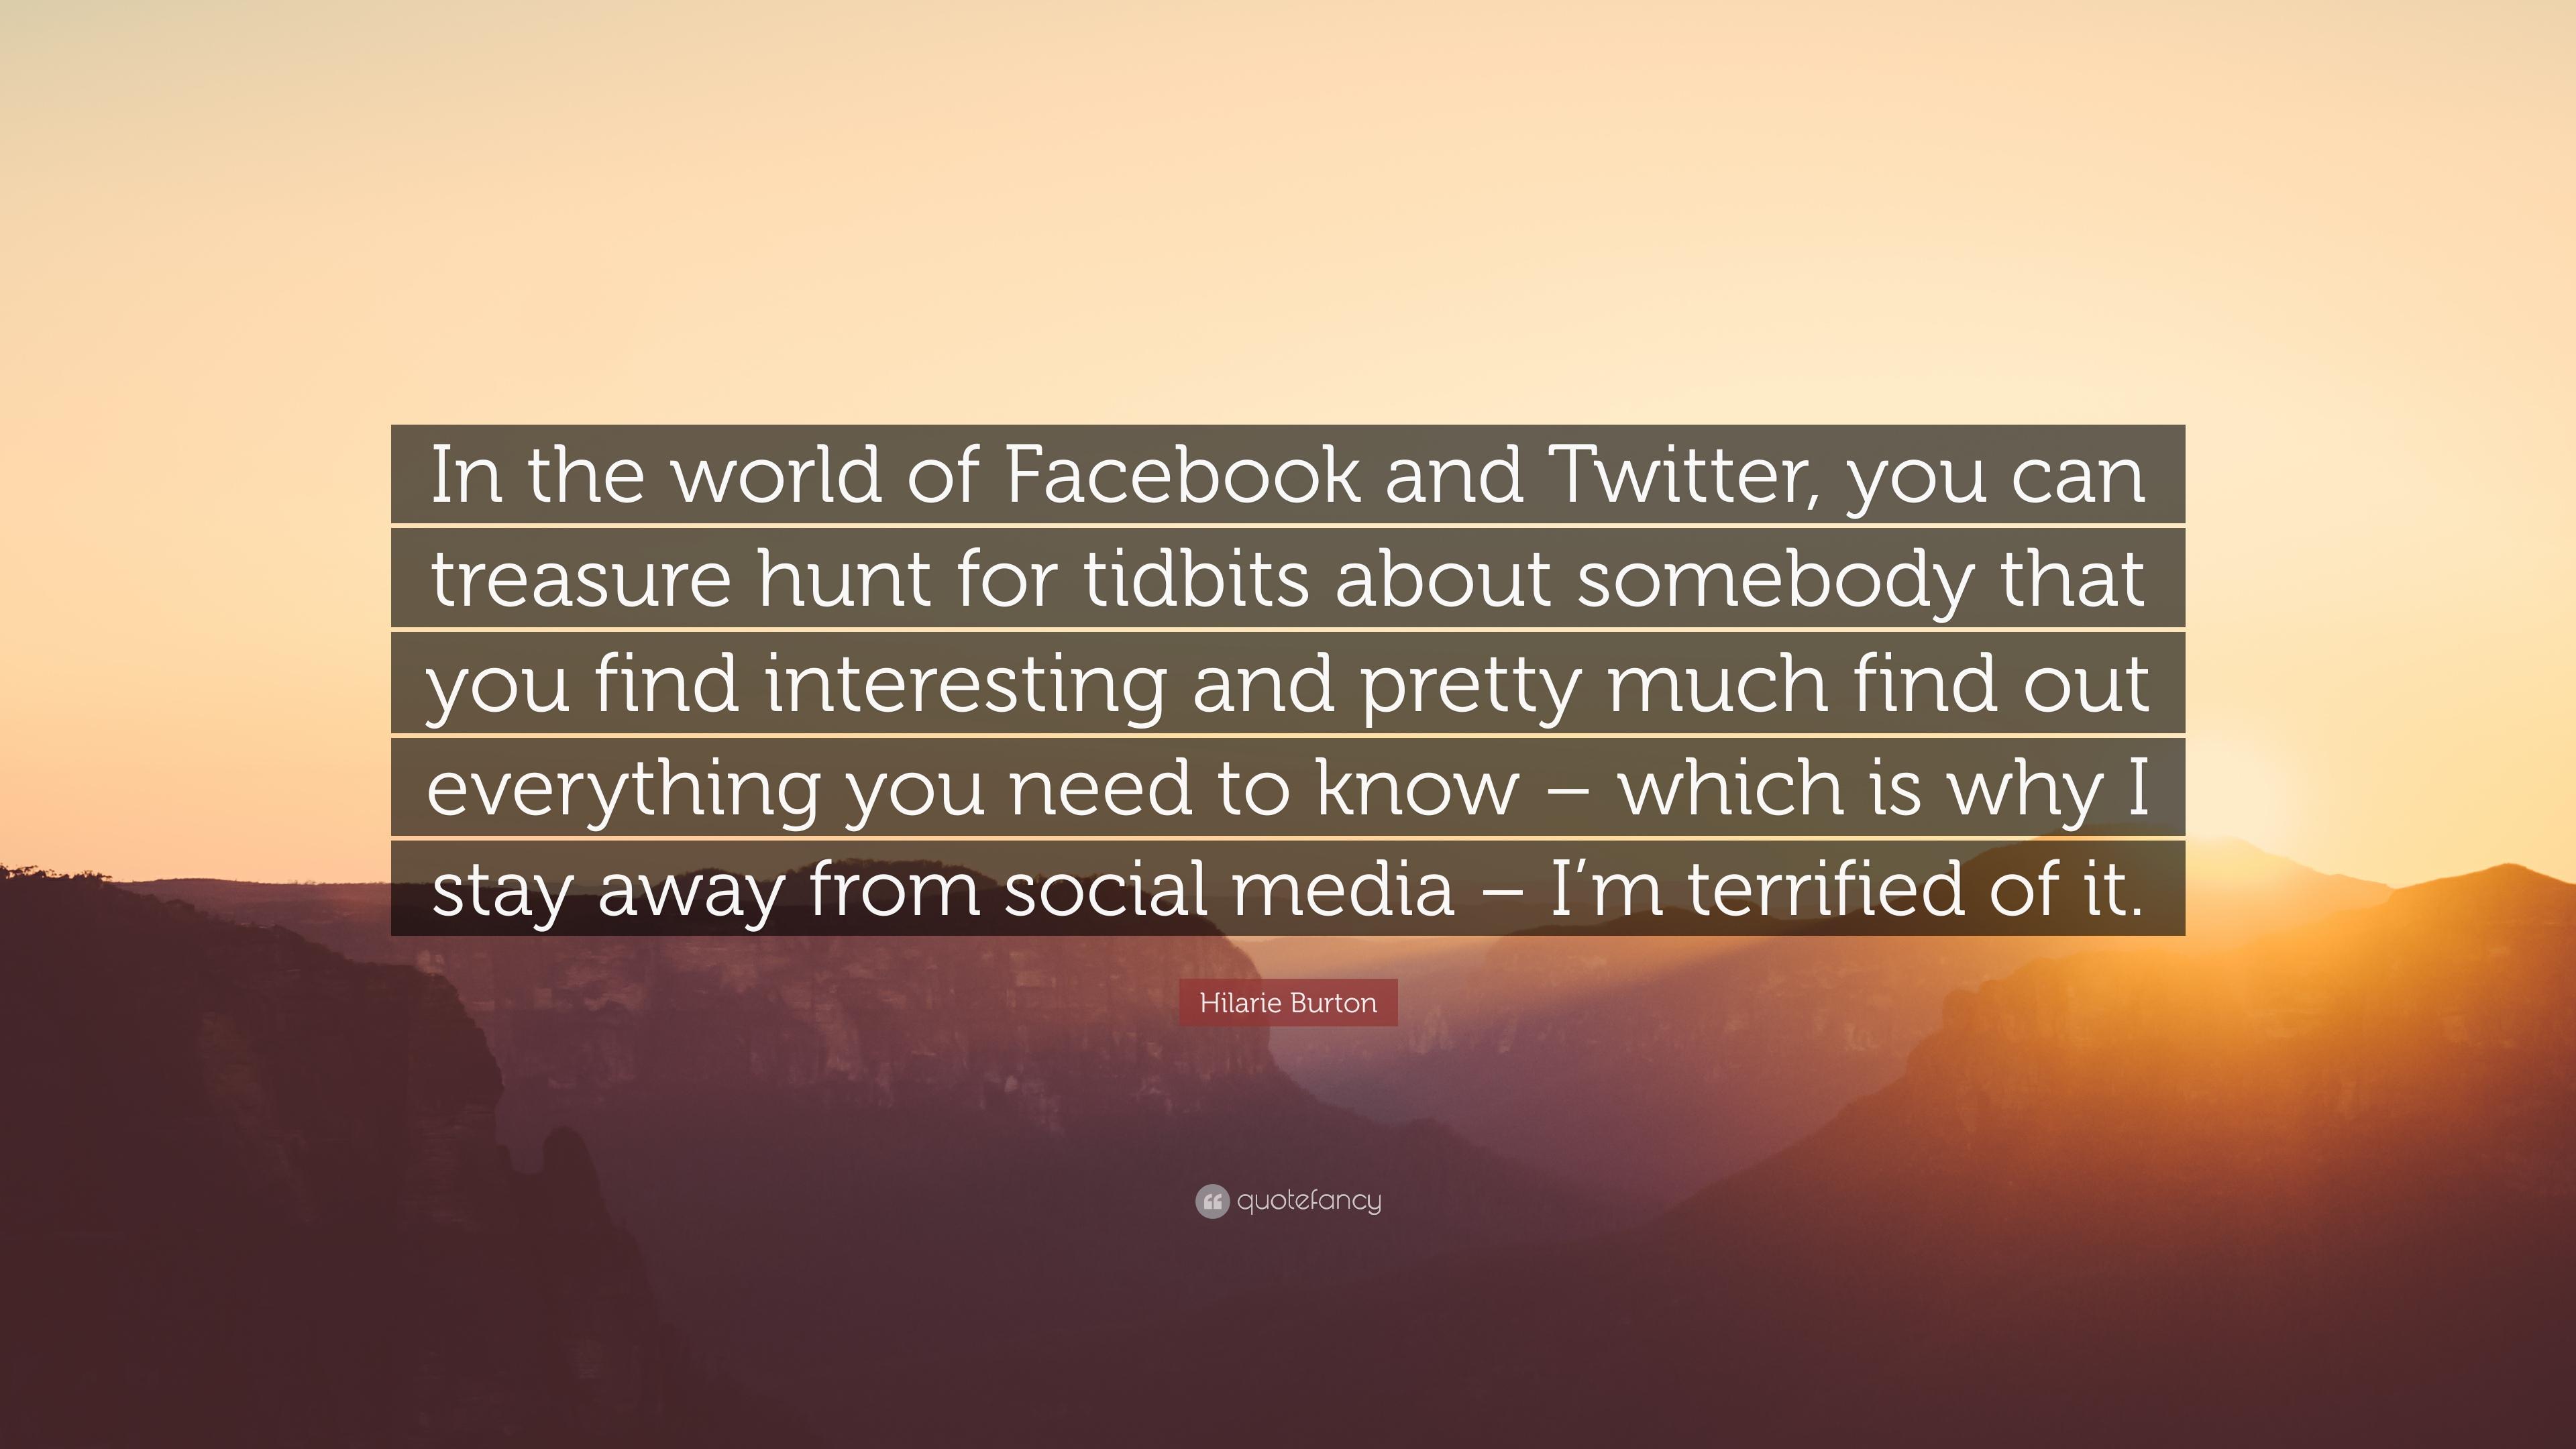 Hilarie Burton Quote: “In the world of Facebook and Twitter, you can